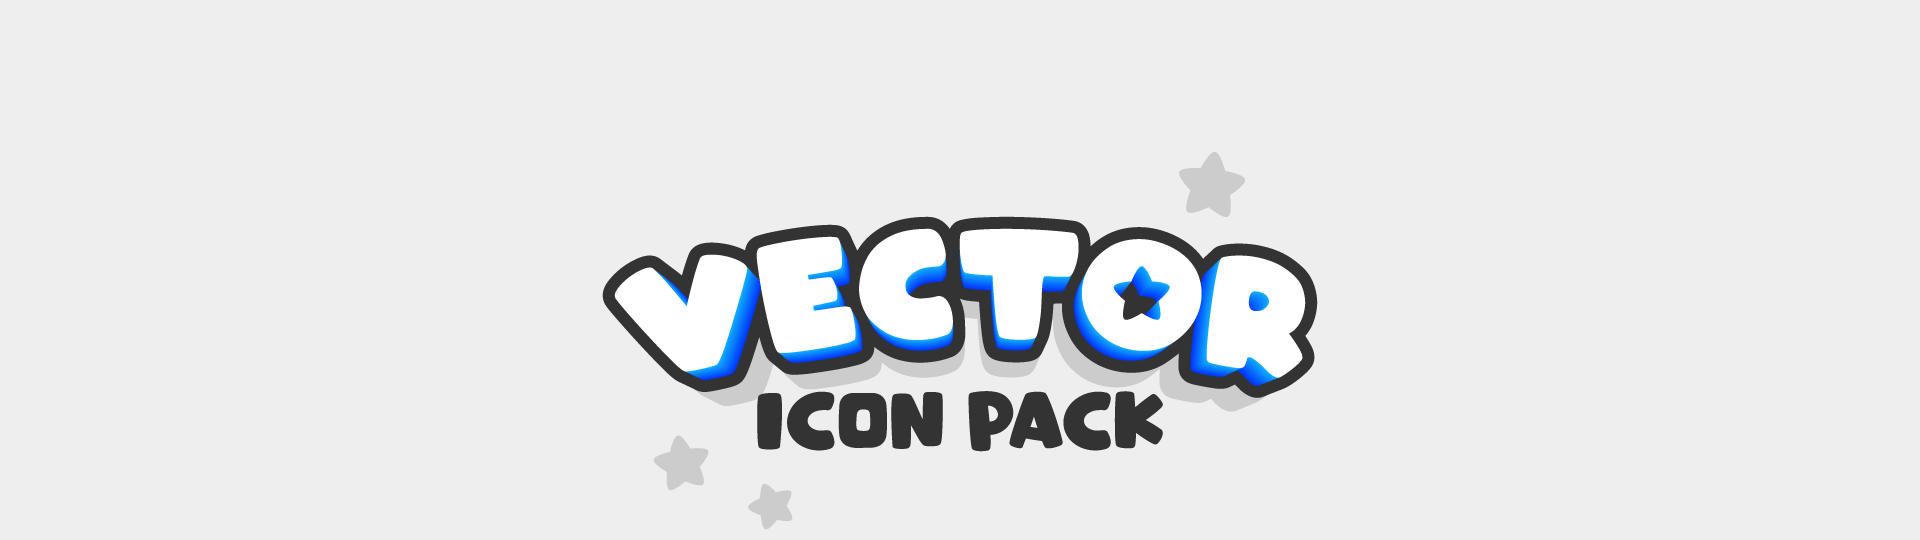 Vector Icon Pack - Pro Upgrade